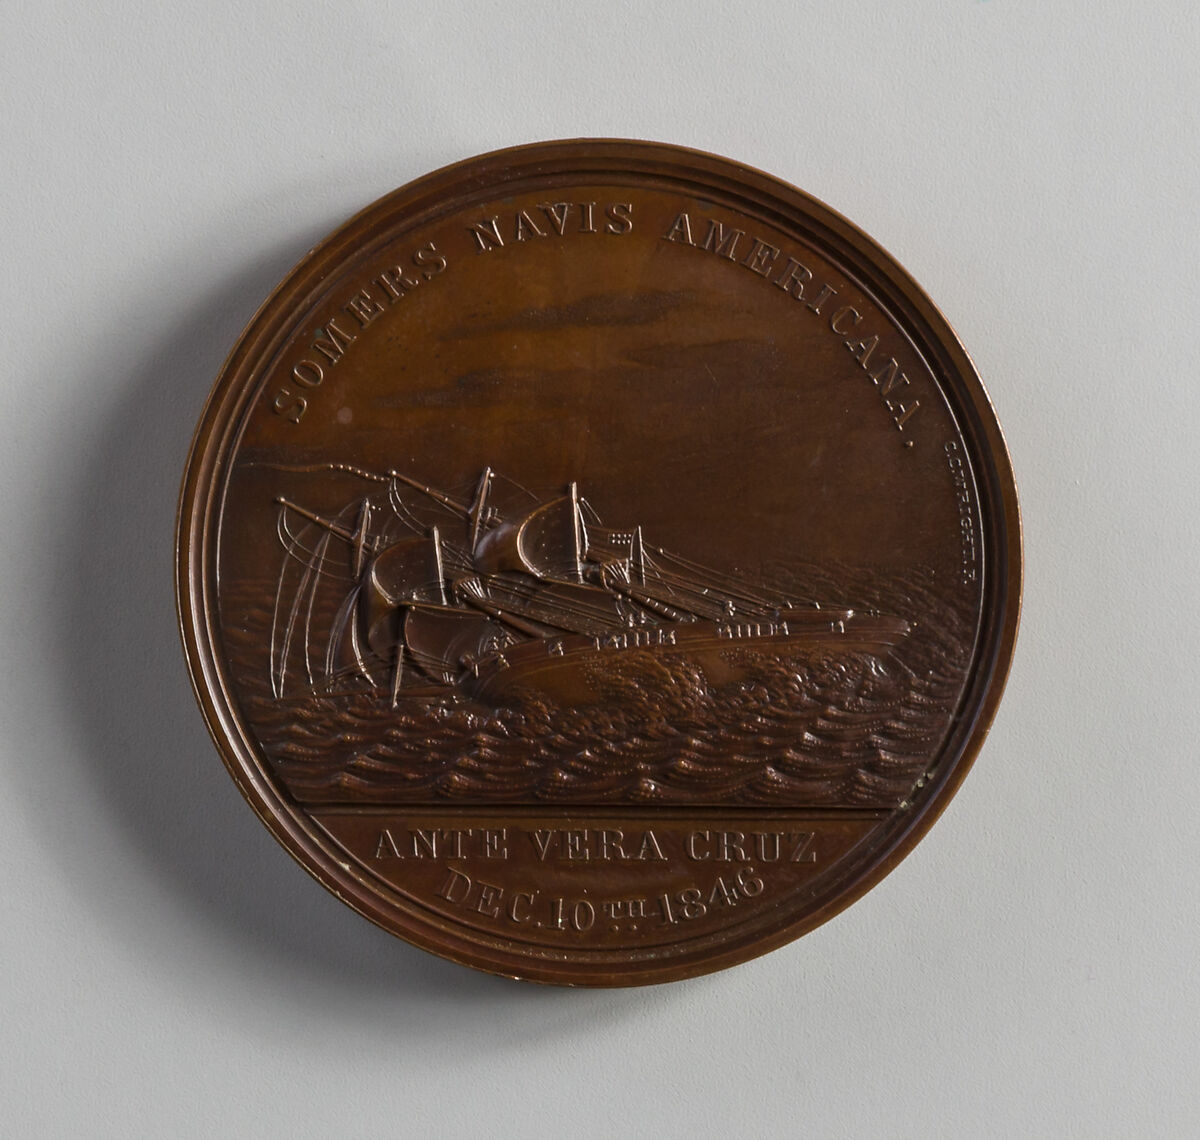 "Somers Medal", Charles Cushing Wright, Bronze 